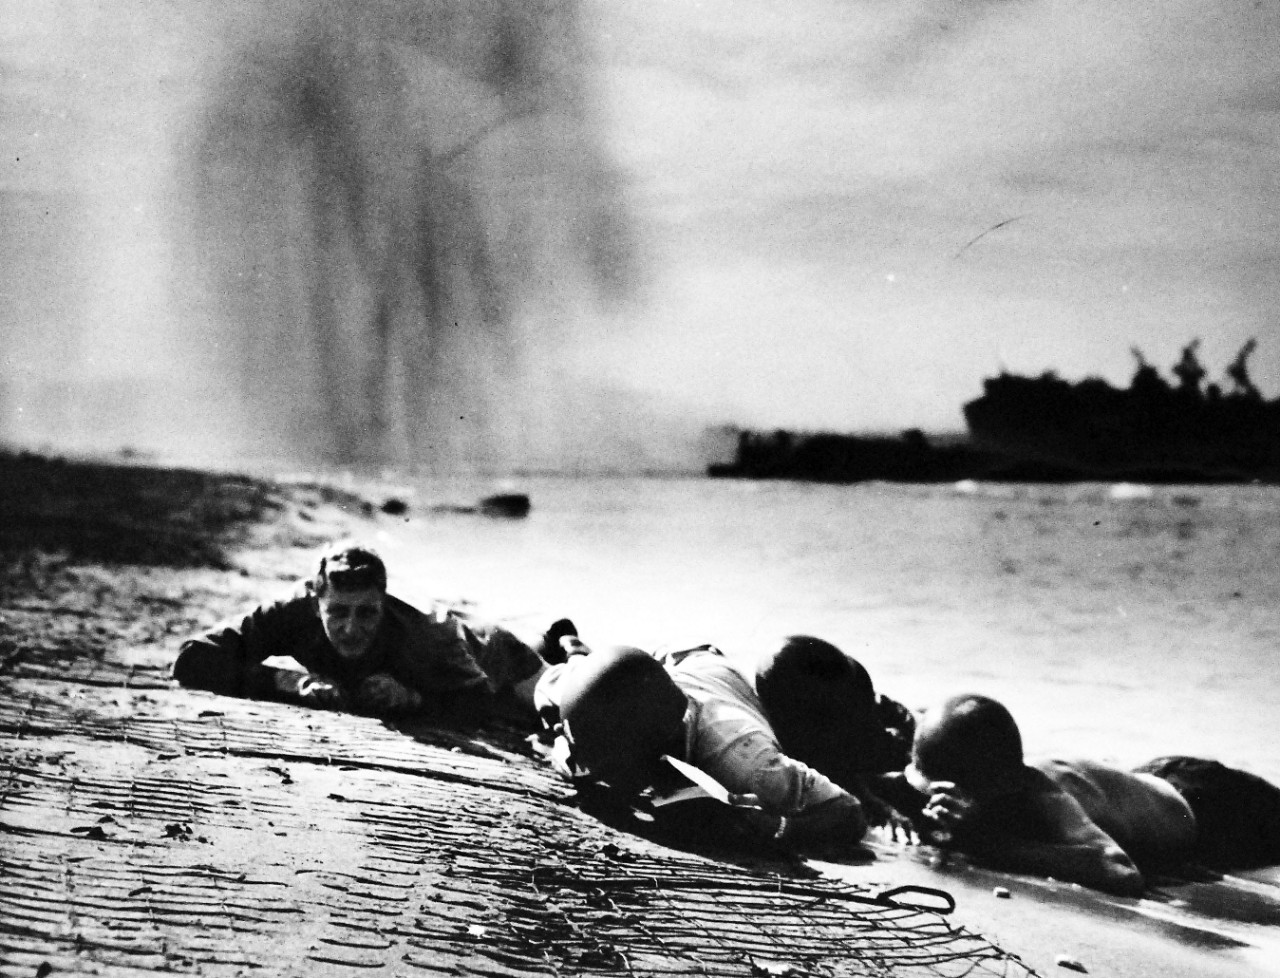 26-G-2000:   Operation Avalanche, September 1943.  Underneath Dropping Bombs.  U.S. Coast Guardsmen and Navy beach battalion men are shown hugging the shaking beach at Paestum, just south of Salerno, as a German bomber unloads on them.  In the background of the picture, one of the most outstanding of the war, debris from a bomb hit can be seen in the air.  Coast Guardsmen said this was much worse than the Sicilian and North African invasions, in which the Coast Guard also participated.   Official Coast Guard Photograph. Photographed through Mylar sleeve.   Courtesy of the Library of Congress.  (2016/05/19).